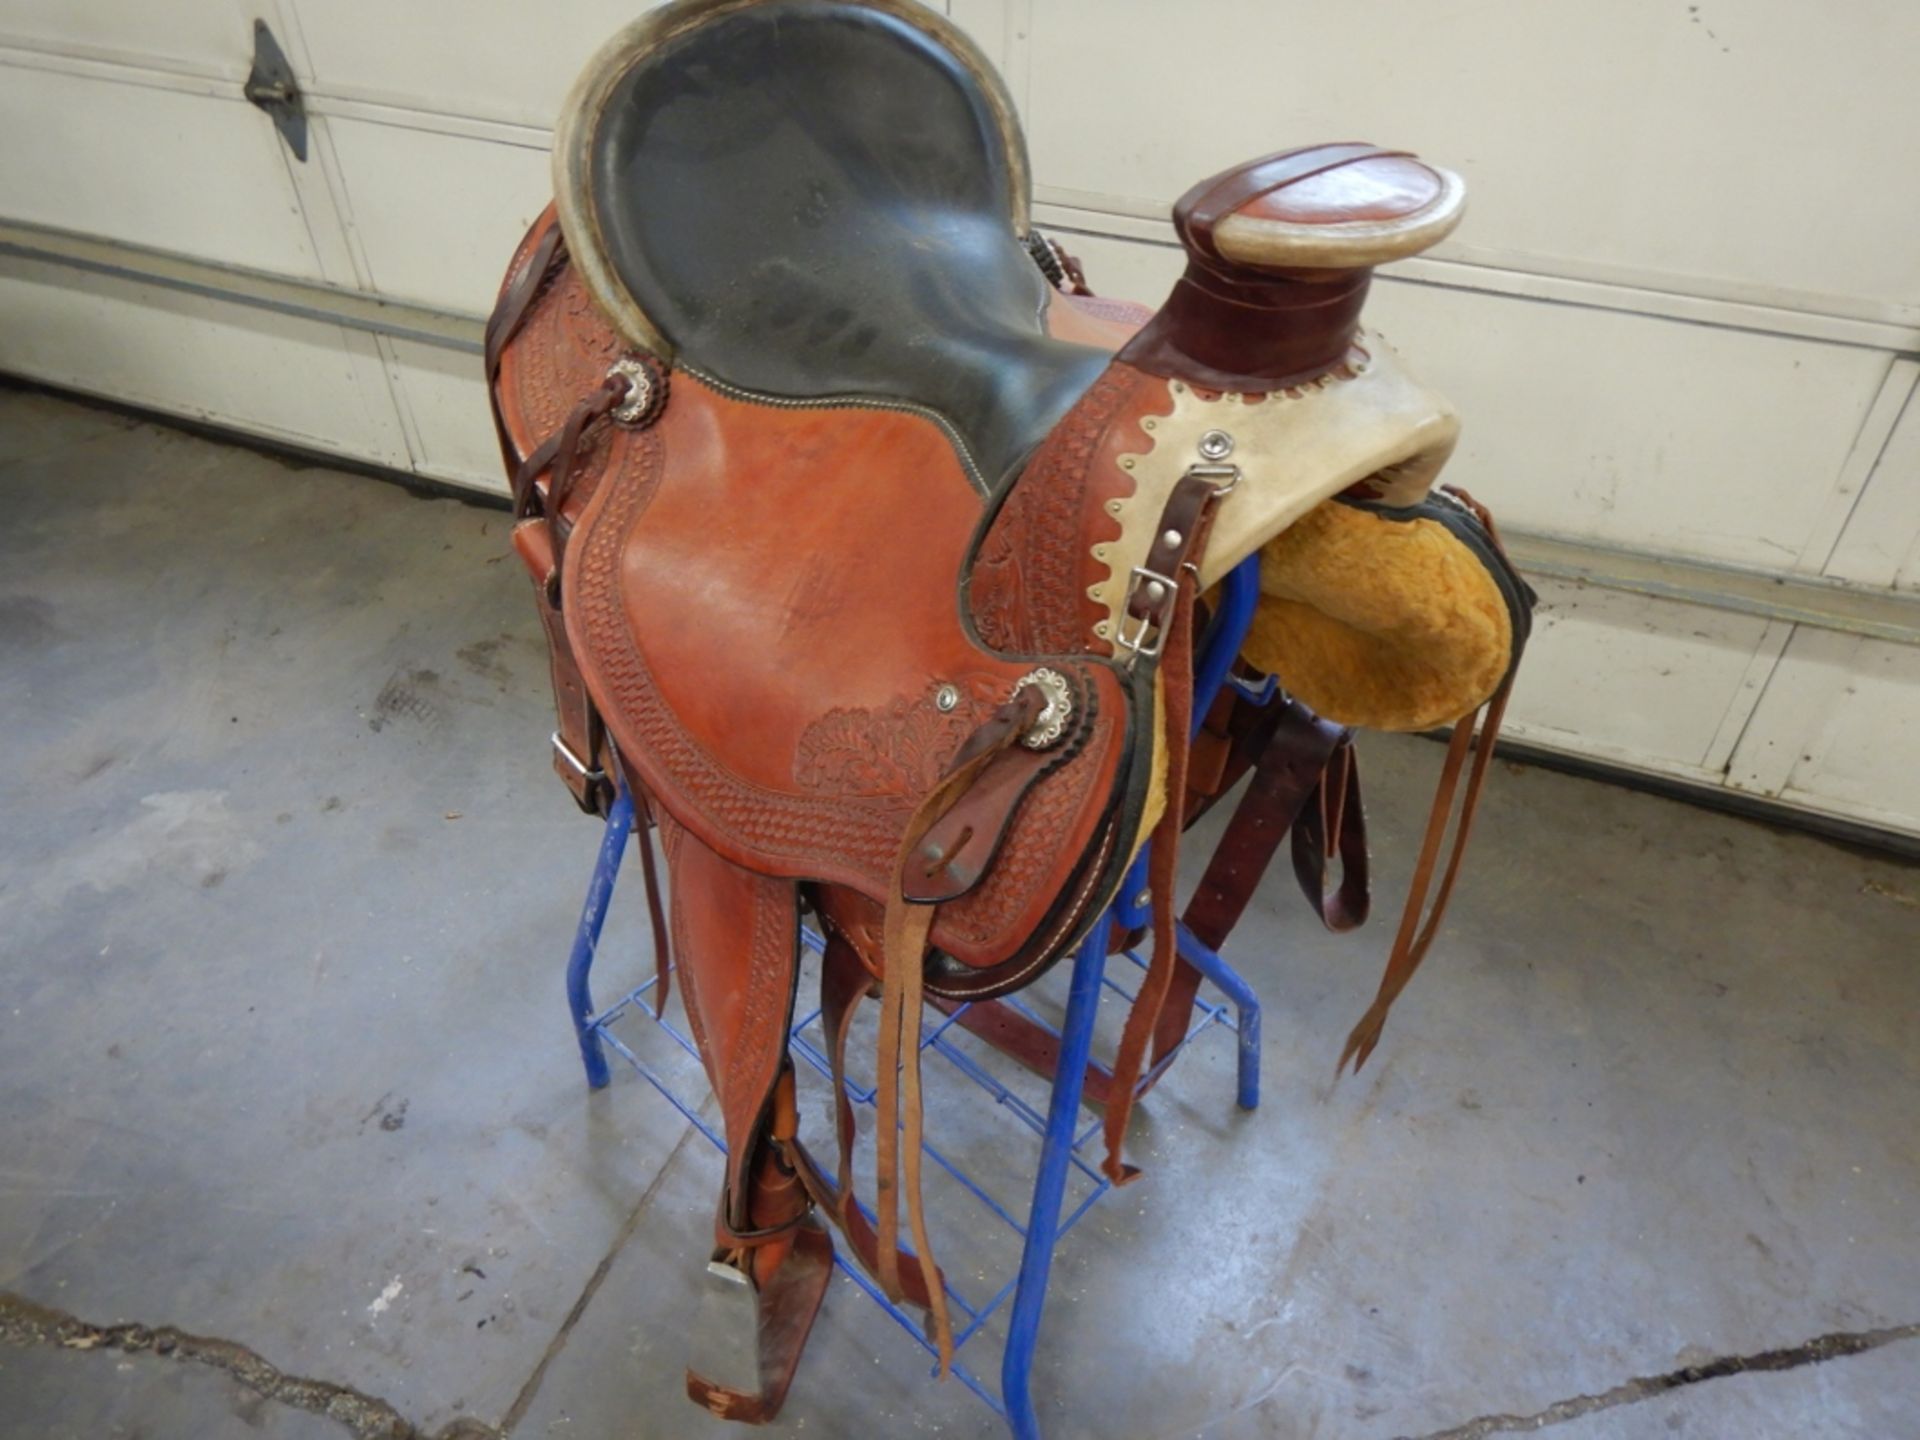 1-WADE 17IN A-FORK STOCK SADDLE W/ WOOD/DBL FIBREGLASS WRAPPED TREE MADE BY GRAND SADDLERY NO. 4801 - Image 5 of 7